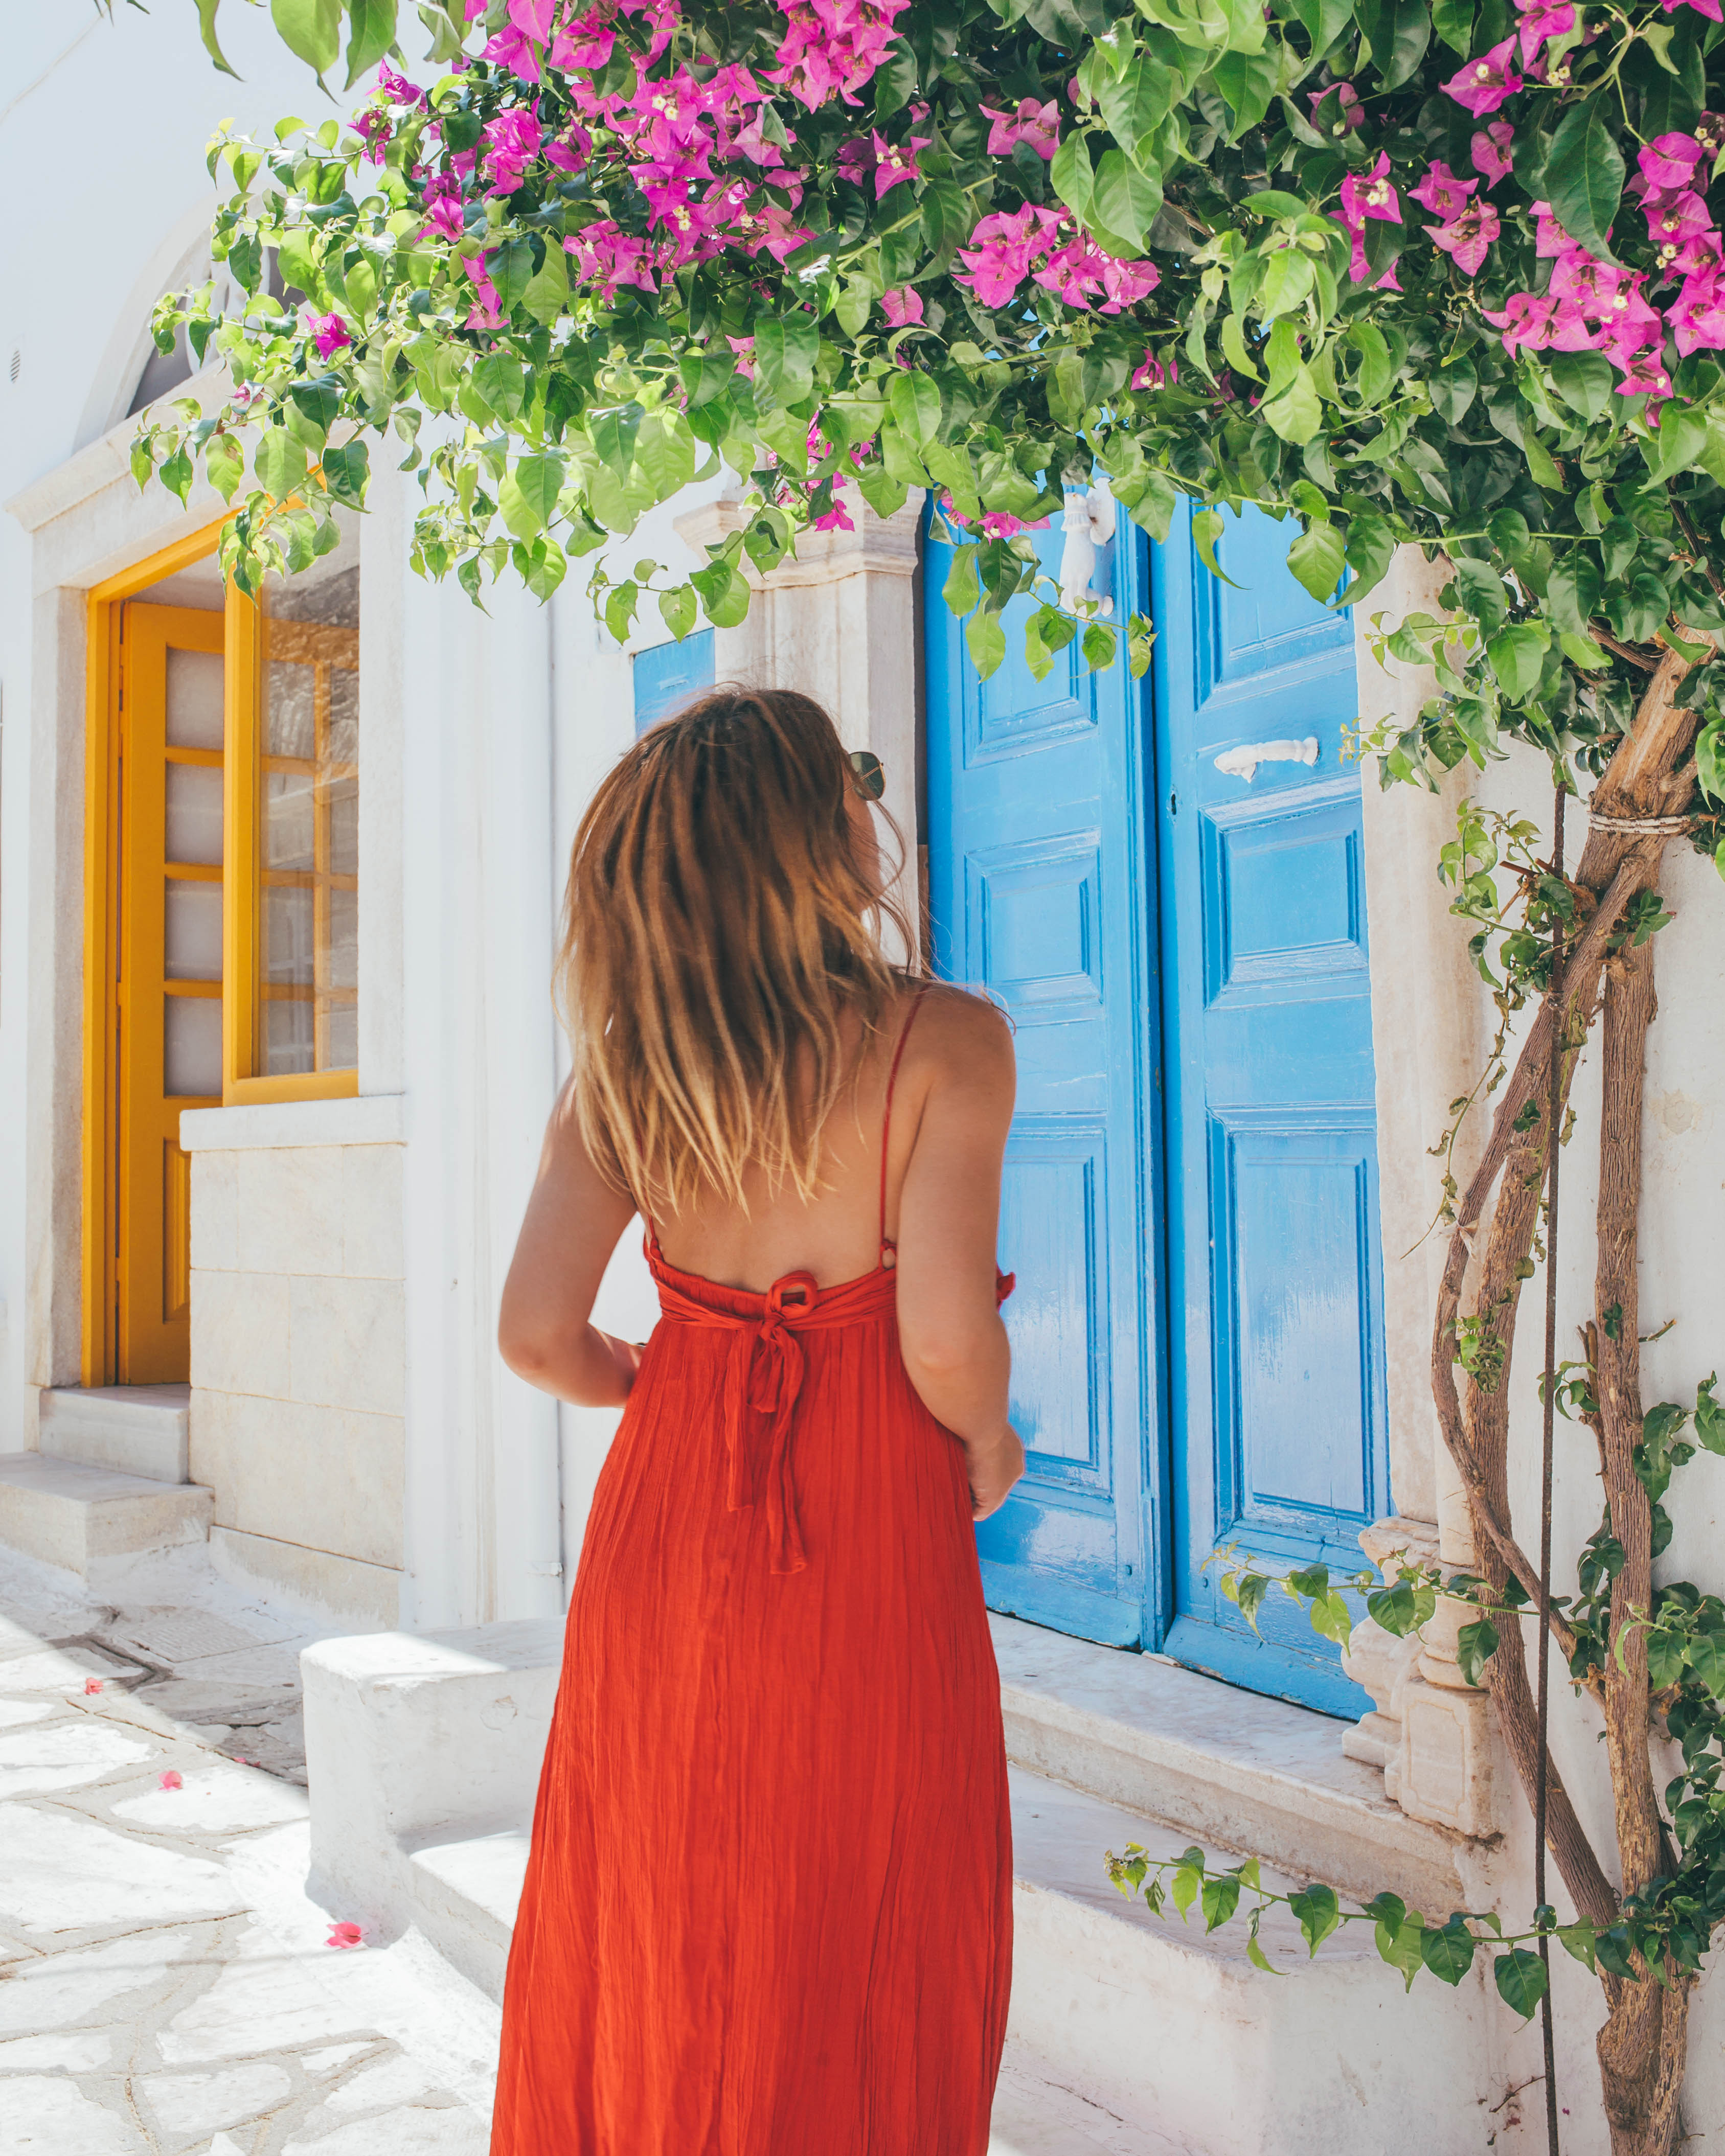 Tinos-Blog-36-of-50 What I learned from my solo Greece travel